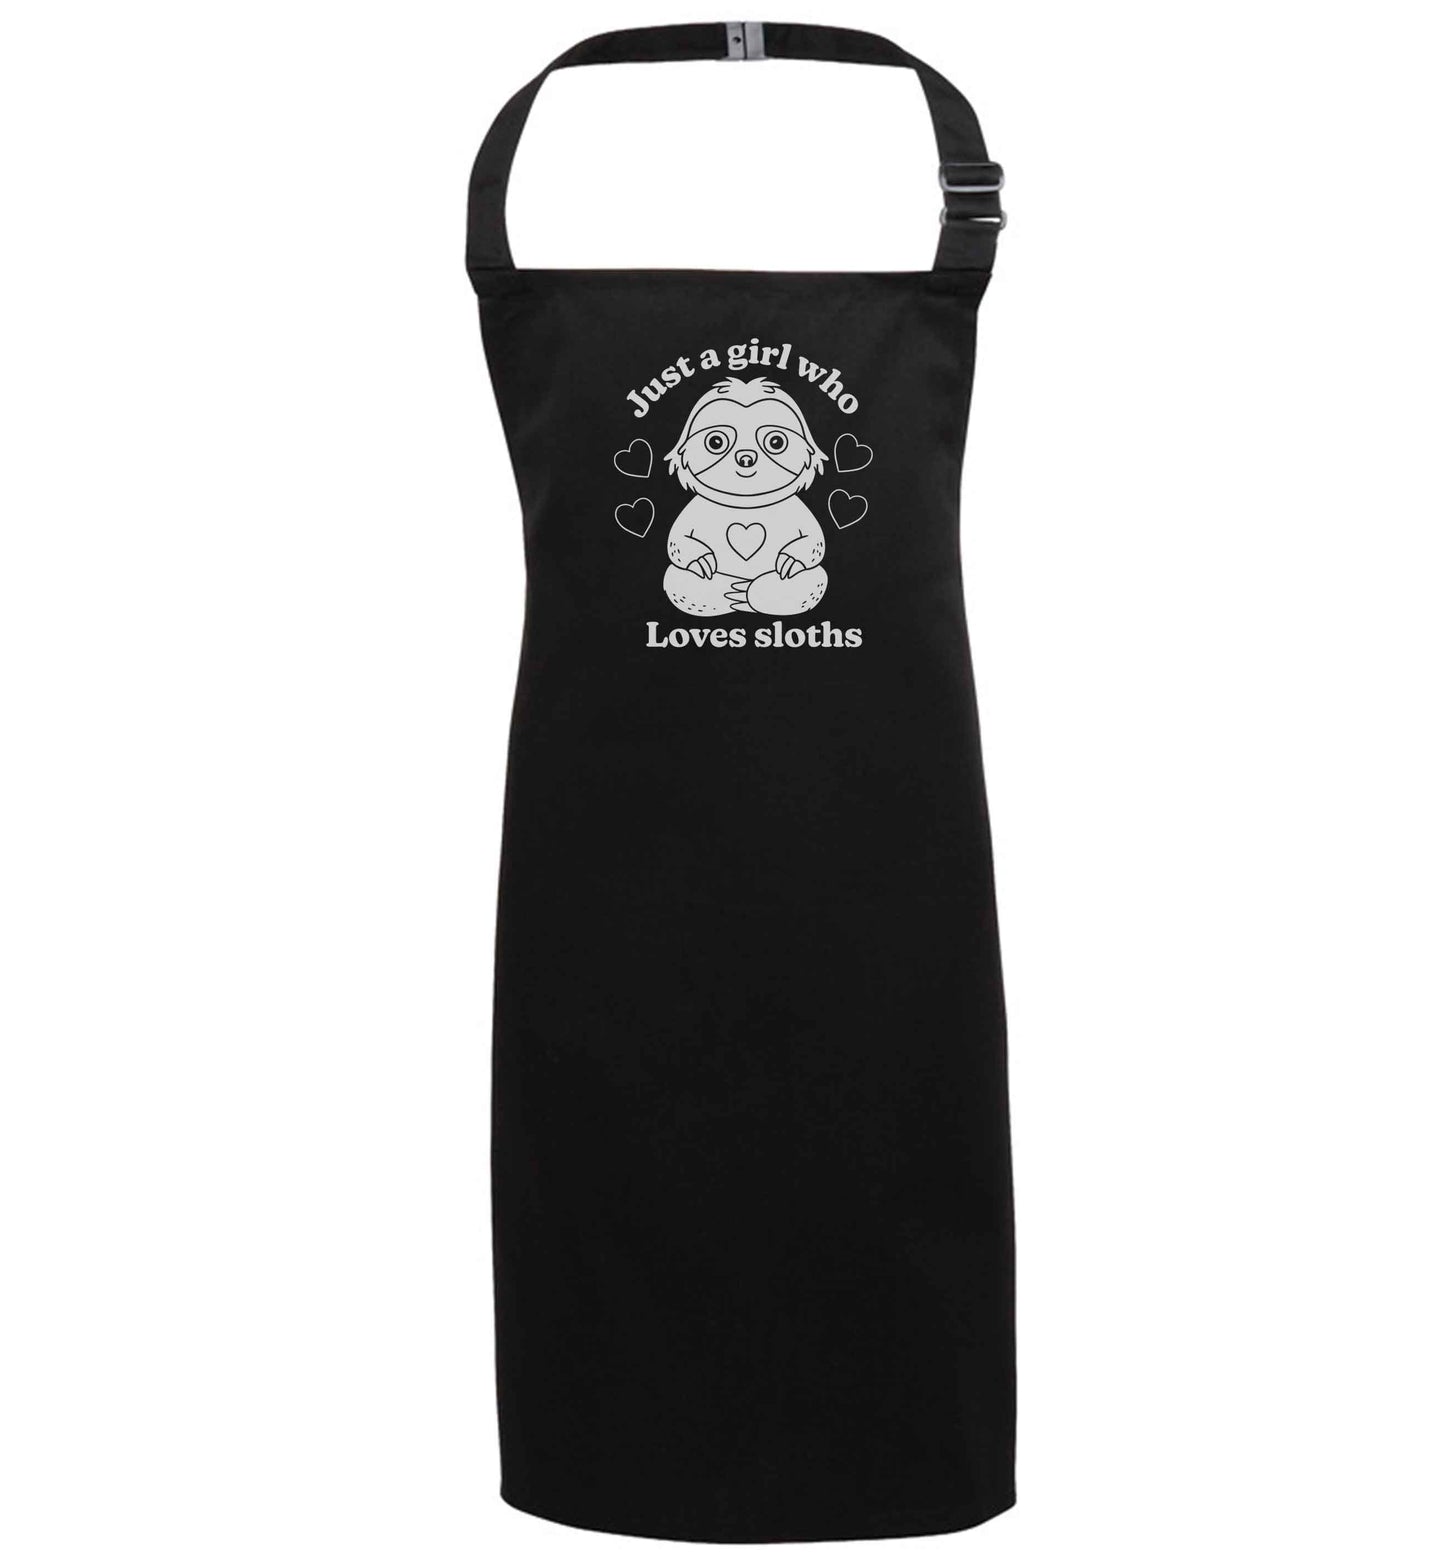 Just a girl who loves sloths black apron 7-10 years